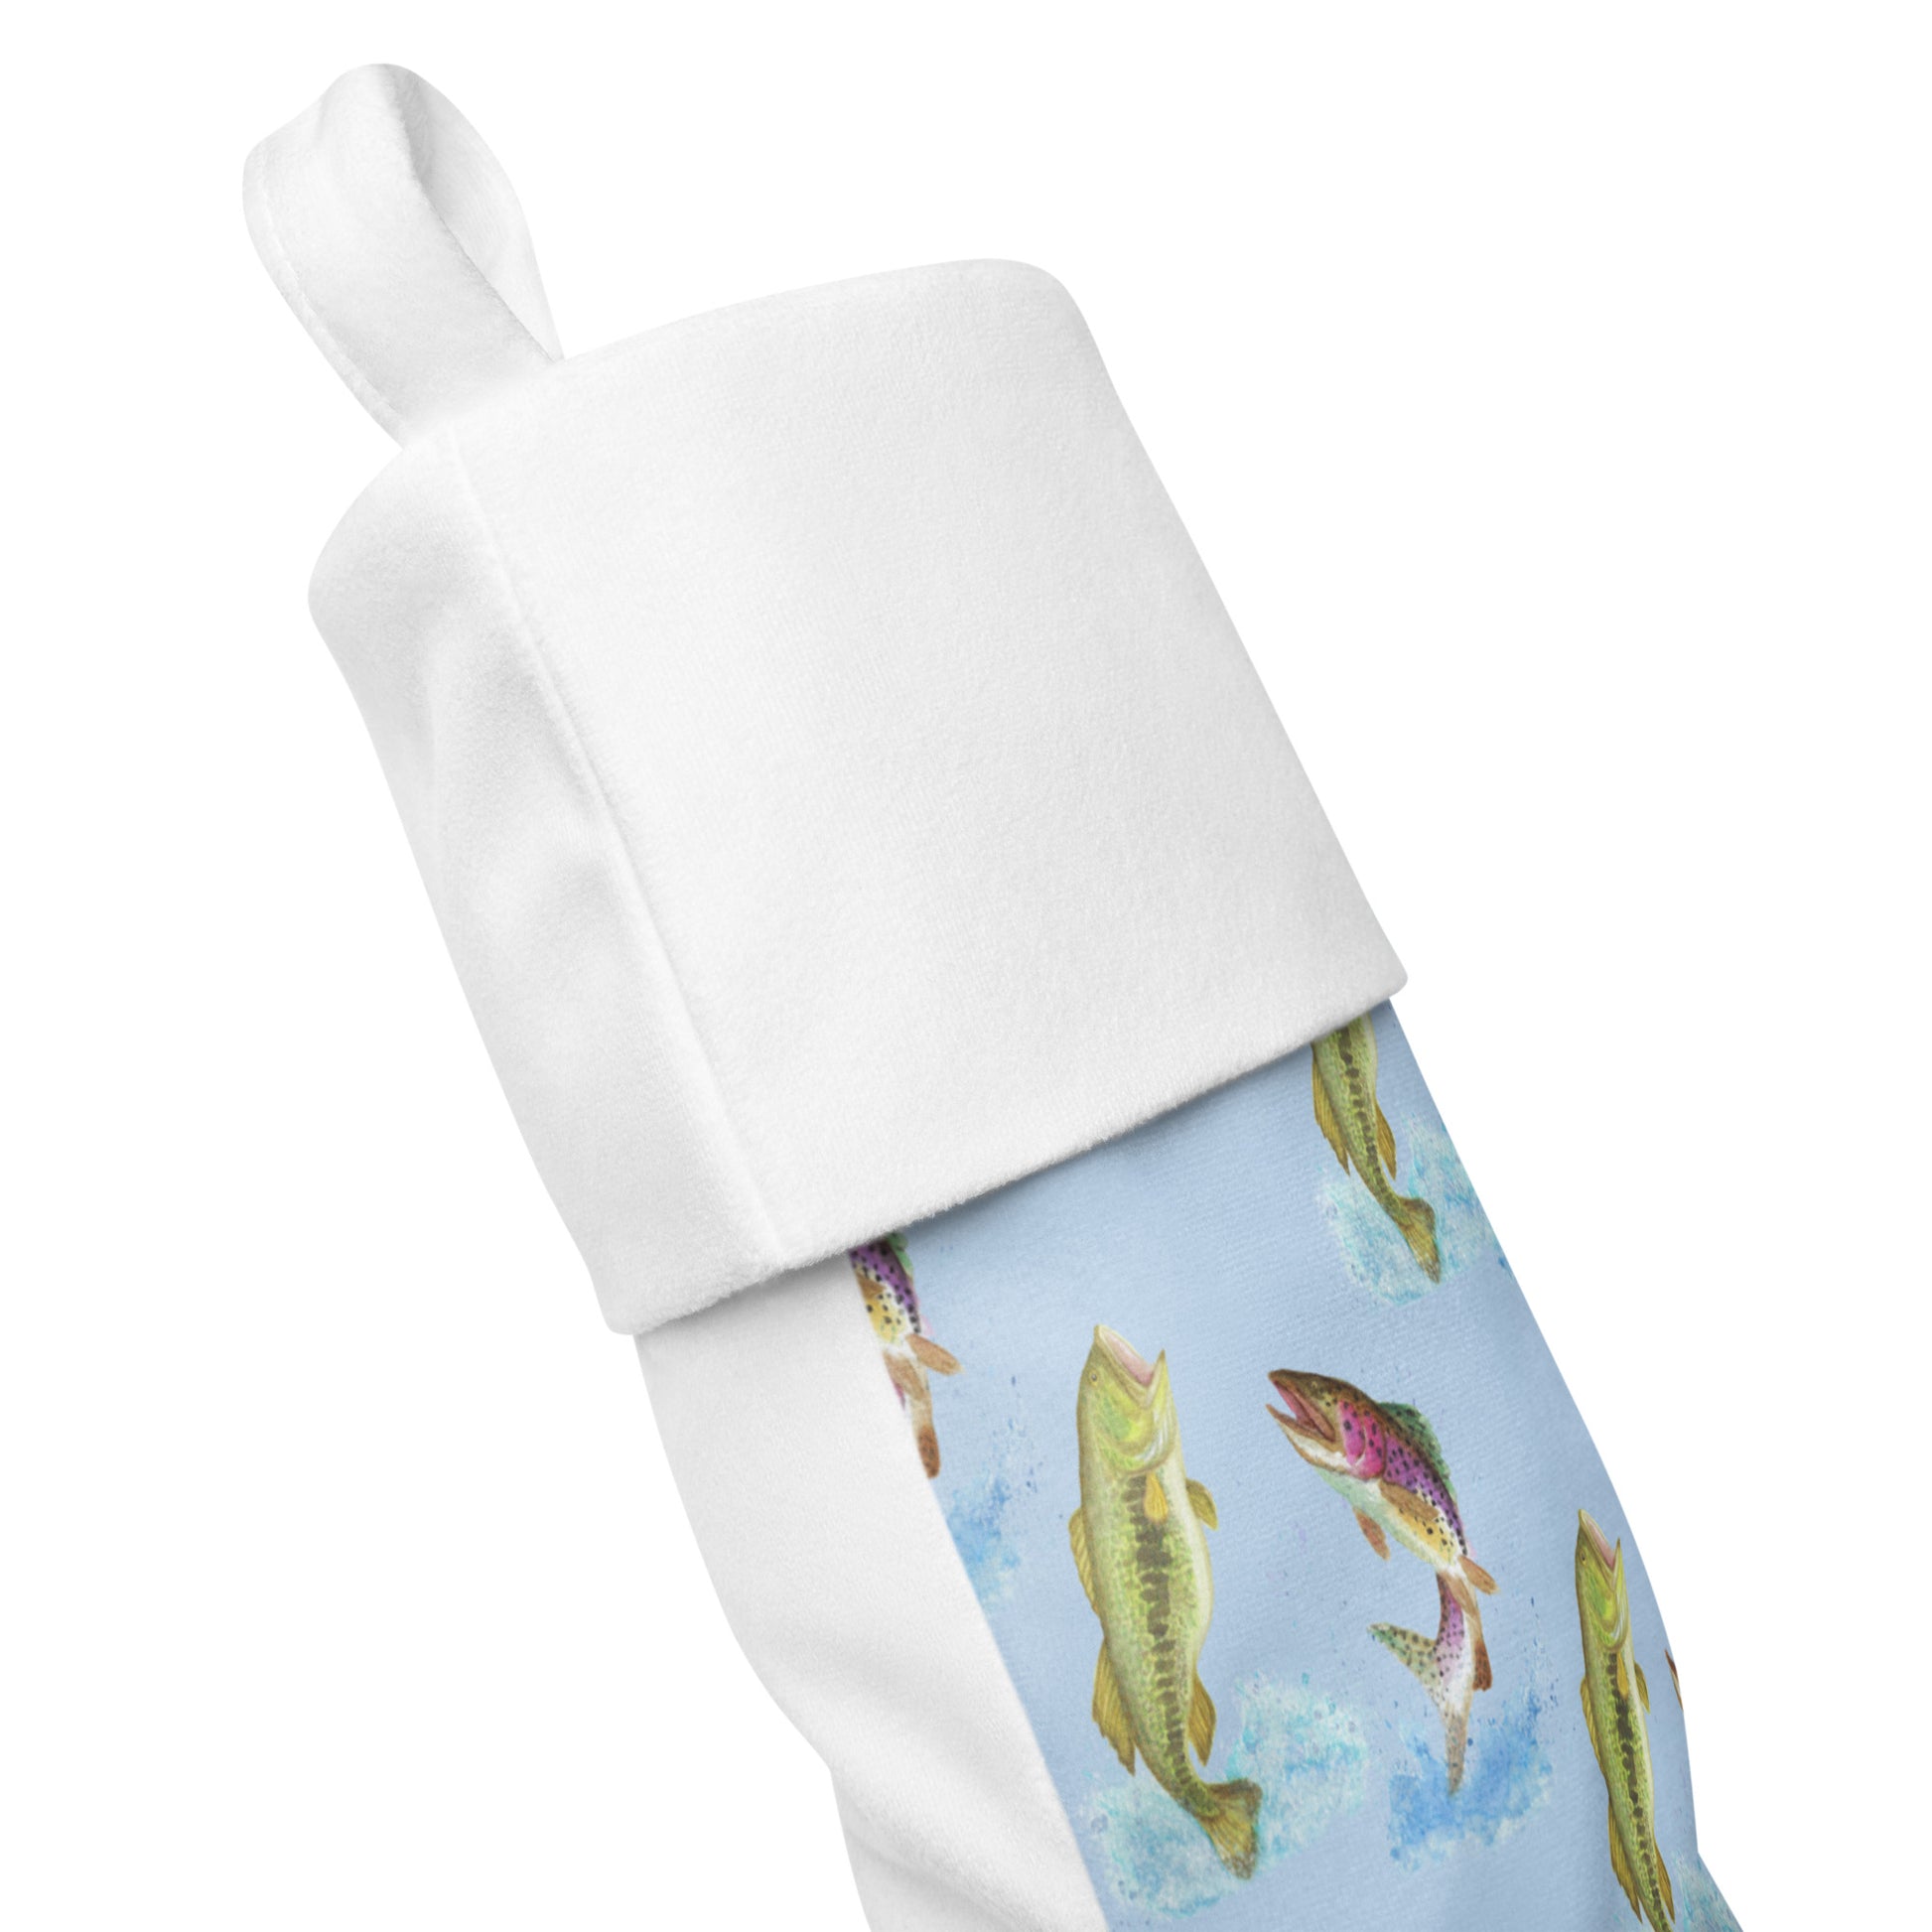 Limited Edition Blue Fishing Christmas Stocking.  7 by 18 inches. The front has watercolor rainbow trout and largemouth bass patterned on a blue background and an off-white polyester back fabric. It has a white fold-over cuff and a hanging loop. Side view shows front and back fabric.